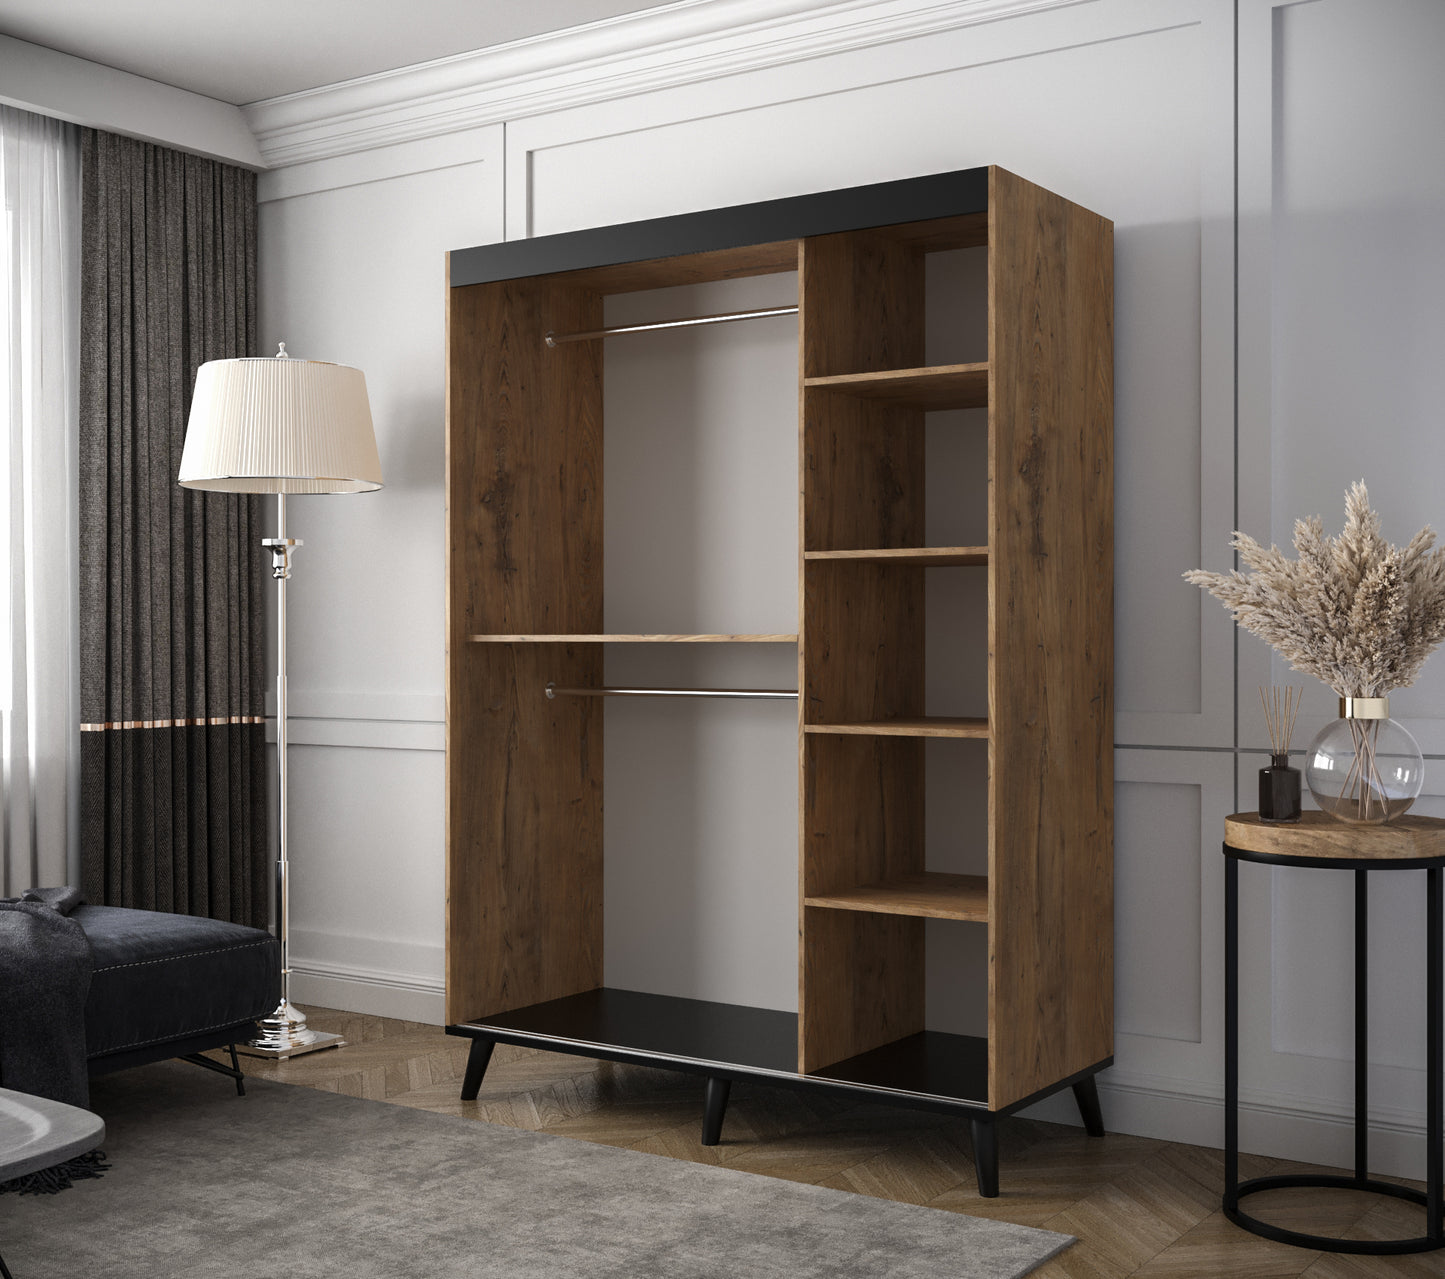 Galicia T3 - Industrial Style Wardrobe Mirrors Shelves Drawers Optional >150 cm x 208 cm<